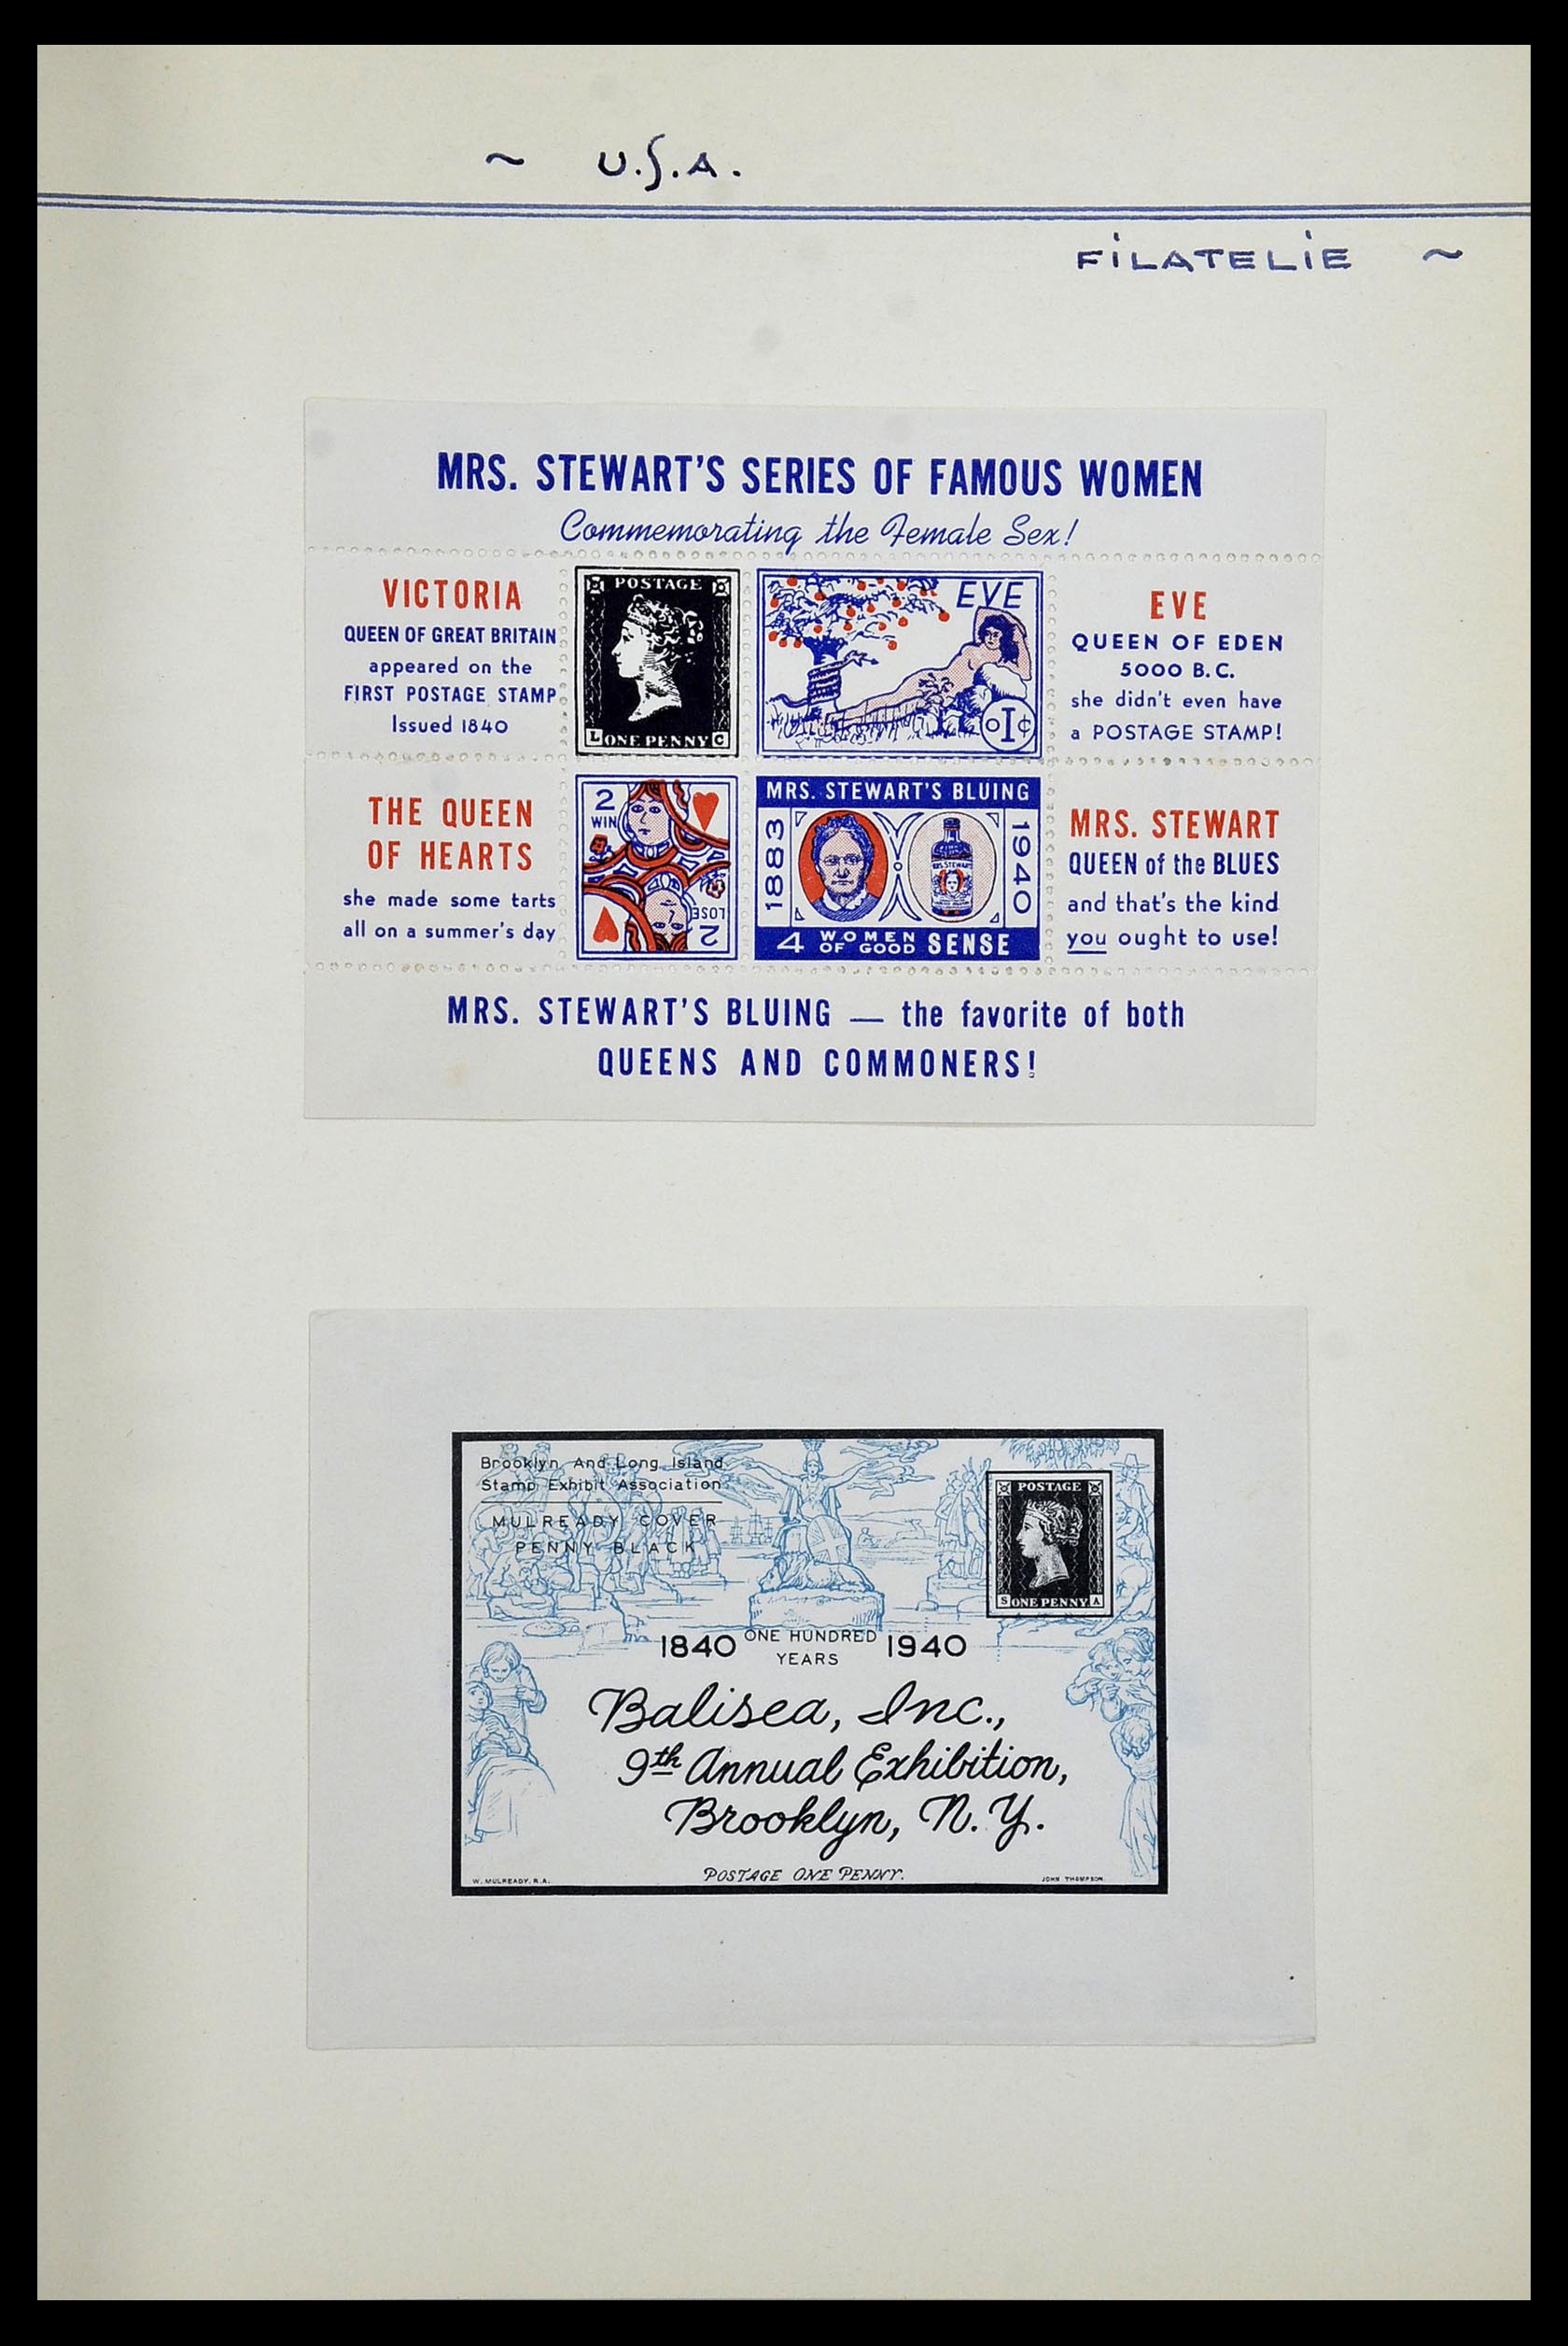 34486 074 - Stamp Collection 34486 USA philatelic labels 1926-1960.